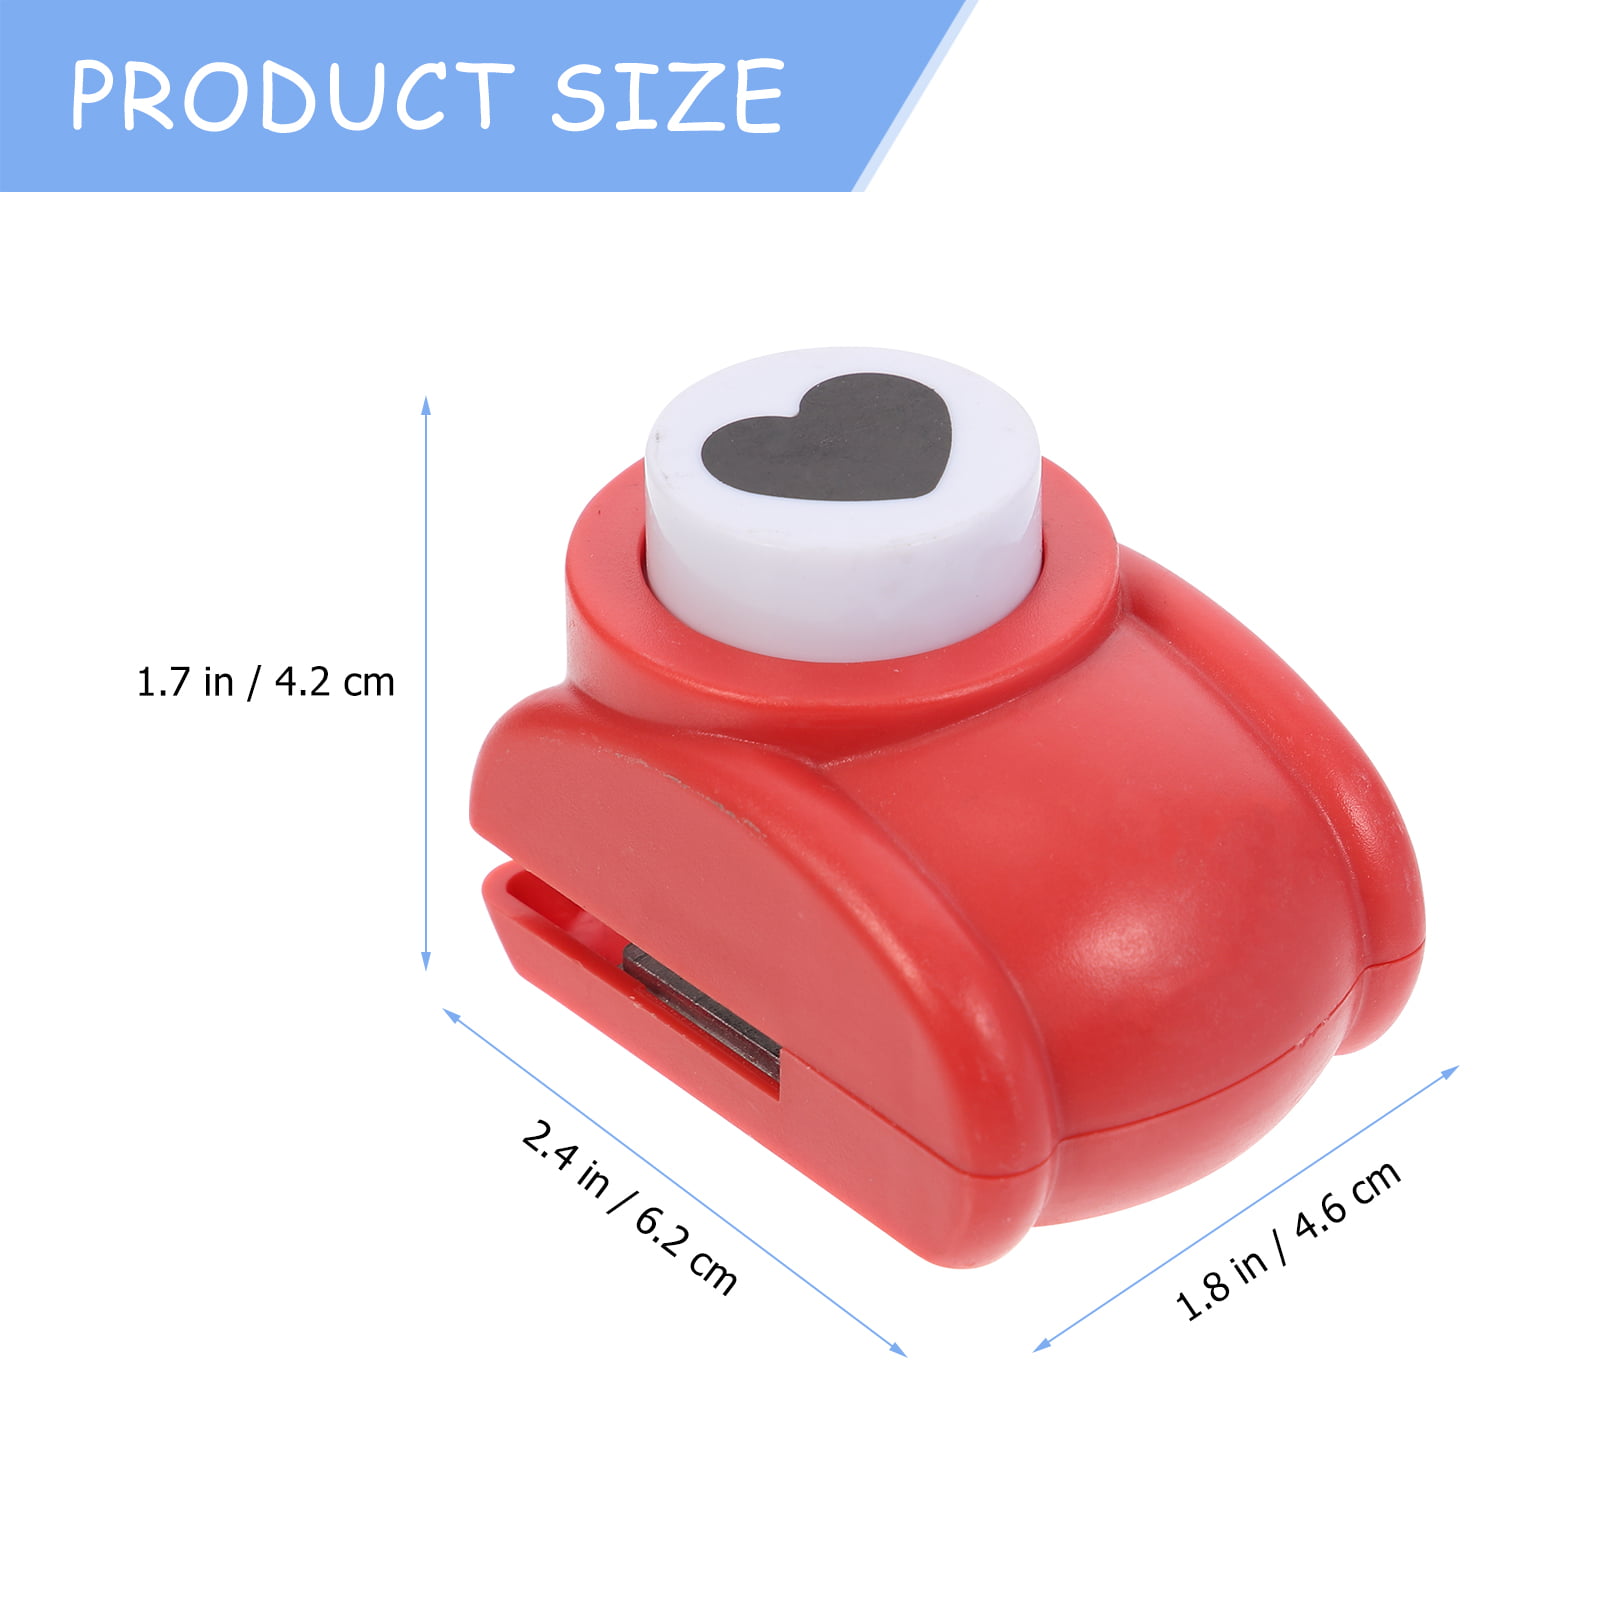 NUOLUX Hole Punch Paper Crafts Heart Puncher Puncher Craft